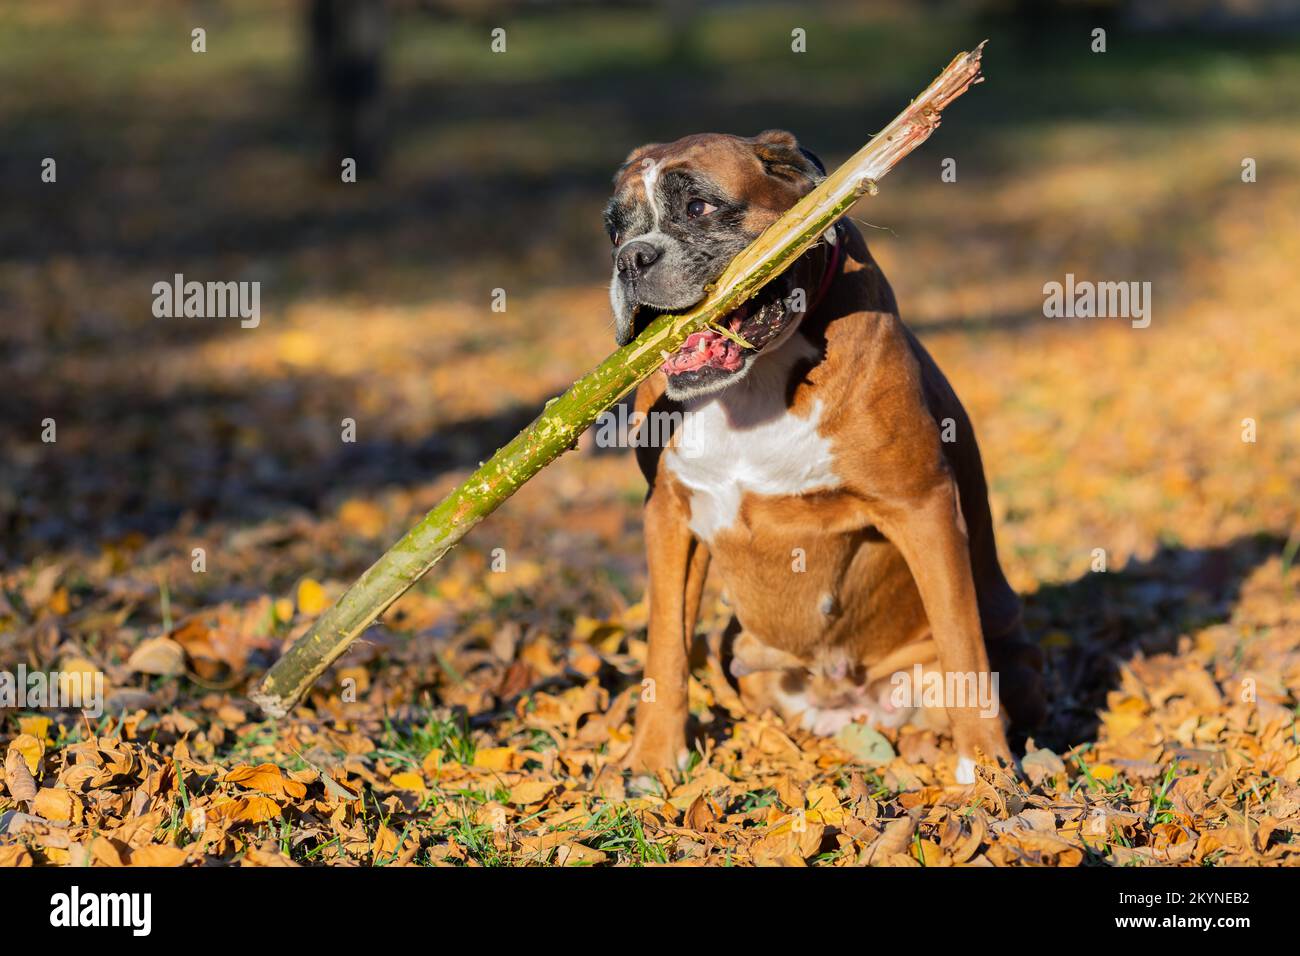 Close-up portrait of a dog, boxer breed, with a stick in his teeth. Stock Photo